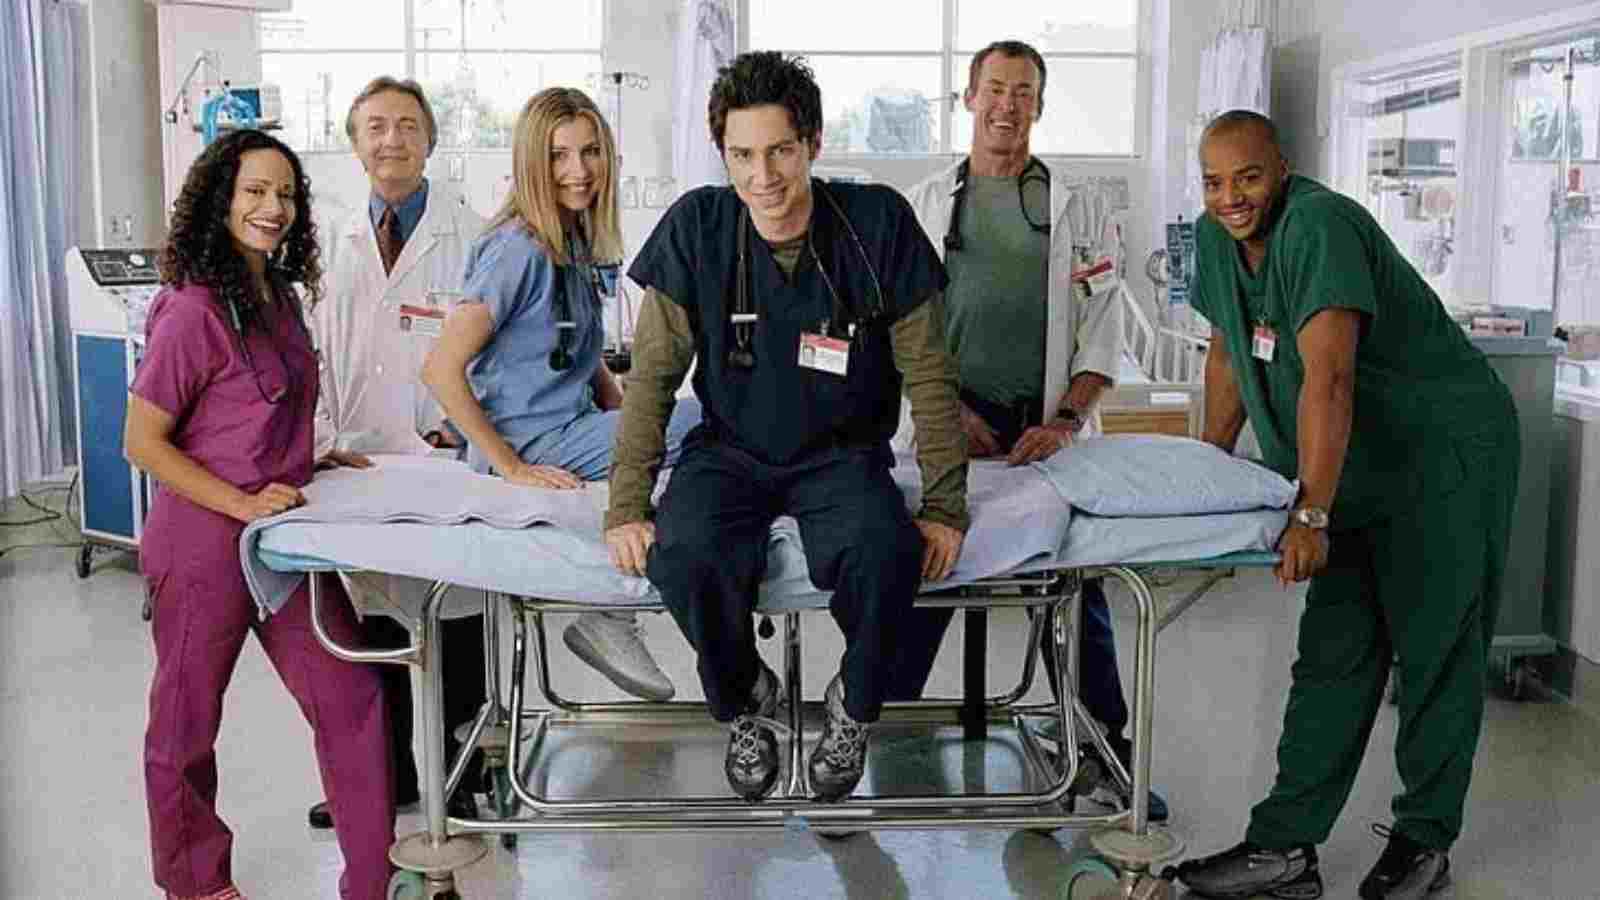 Why was the season finale of Scrubs one of the worst TV series finale season of all times?